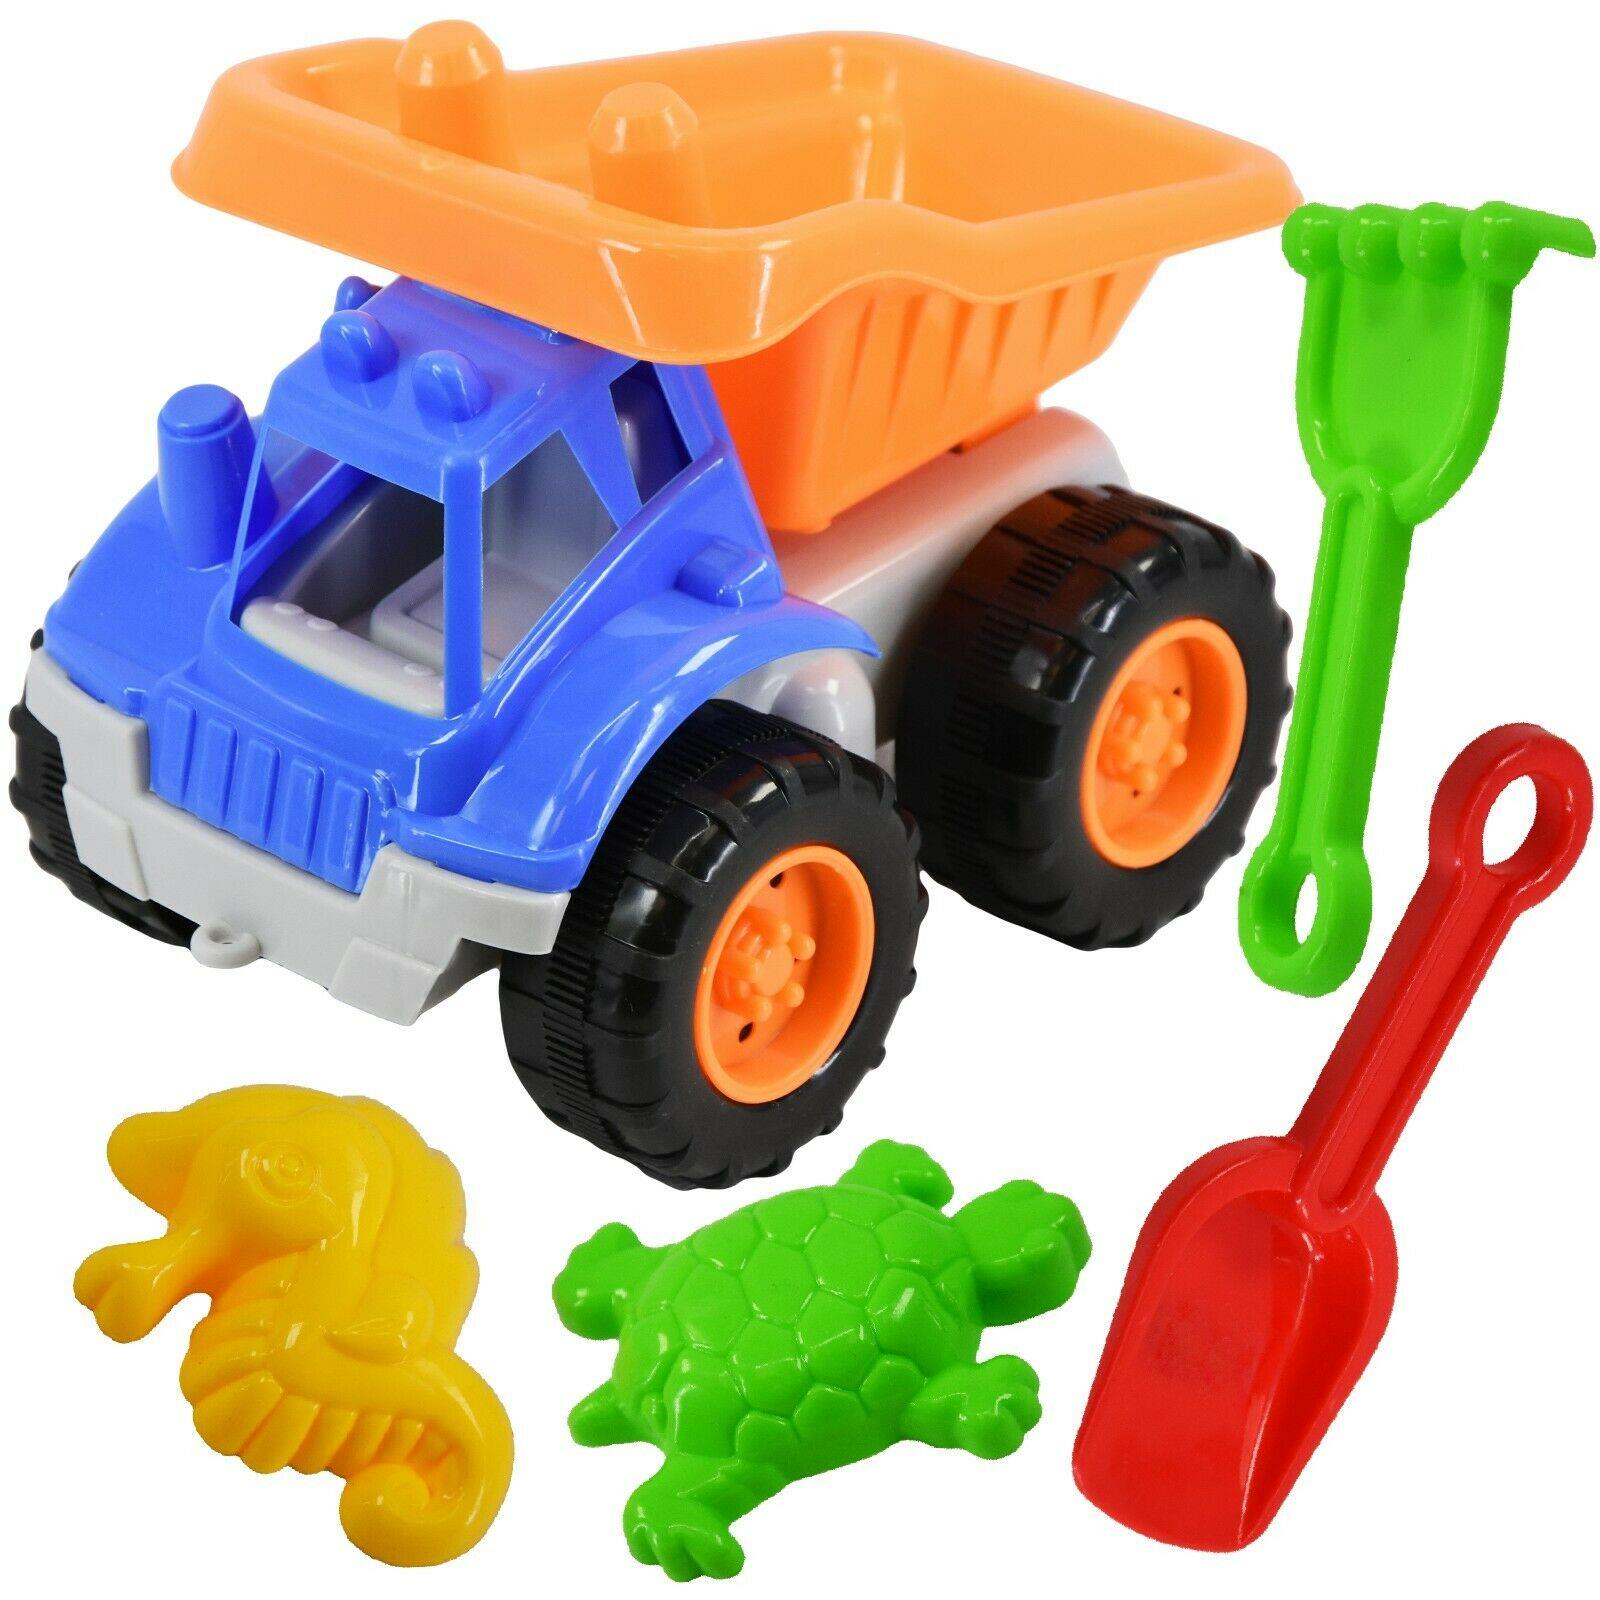 Sand Truck & Accessories Set (5 Pcs.) by The Magic Toy Shop - The Magic Toy Shop